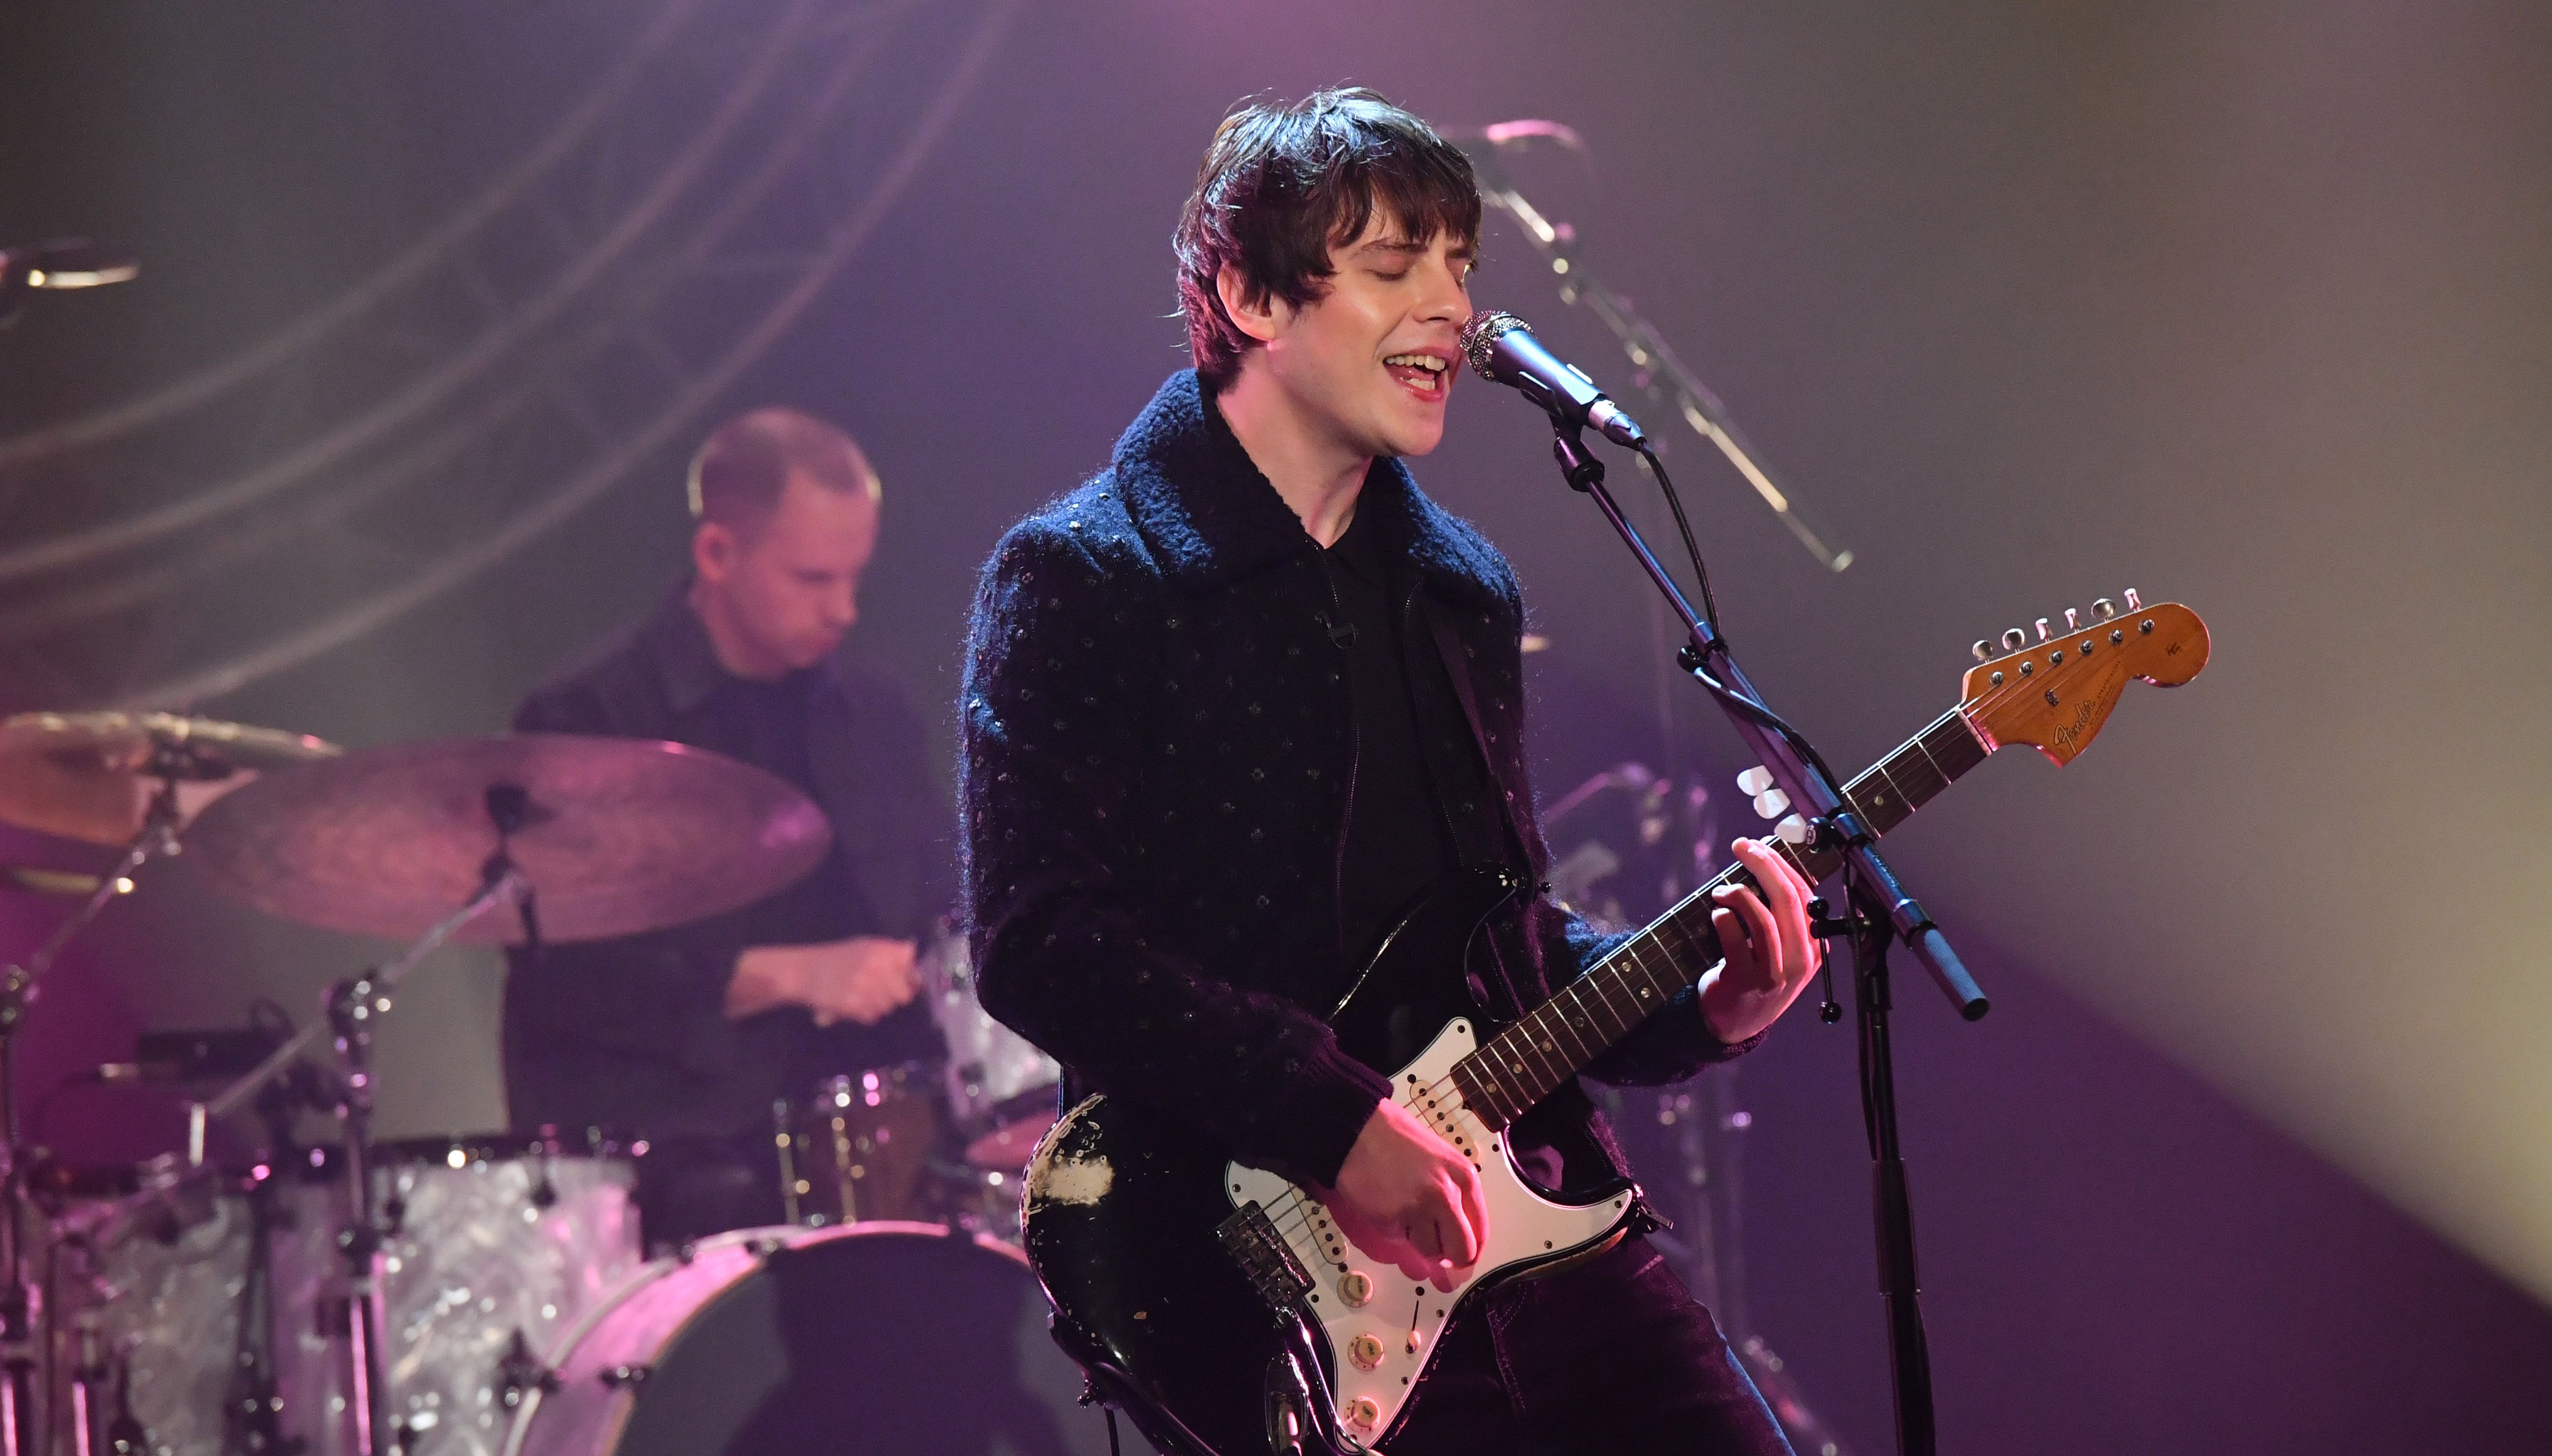 Jake Bugg performing during filming for the Graham Norton Show .